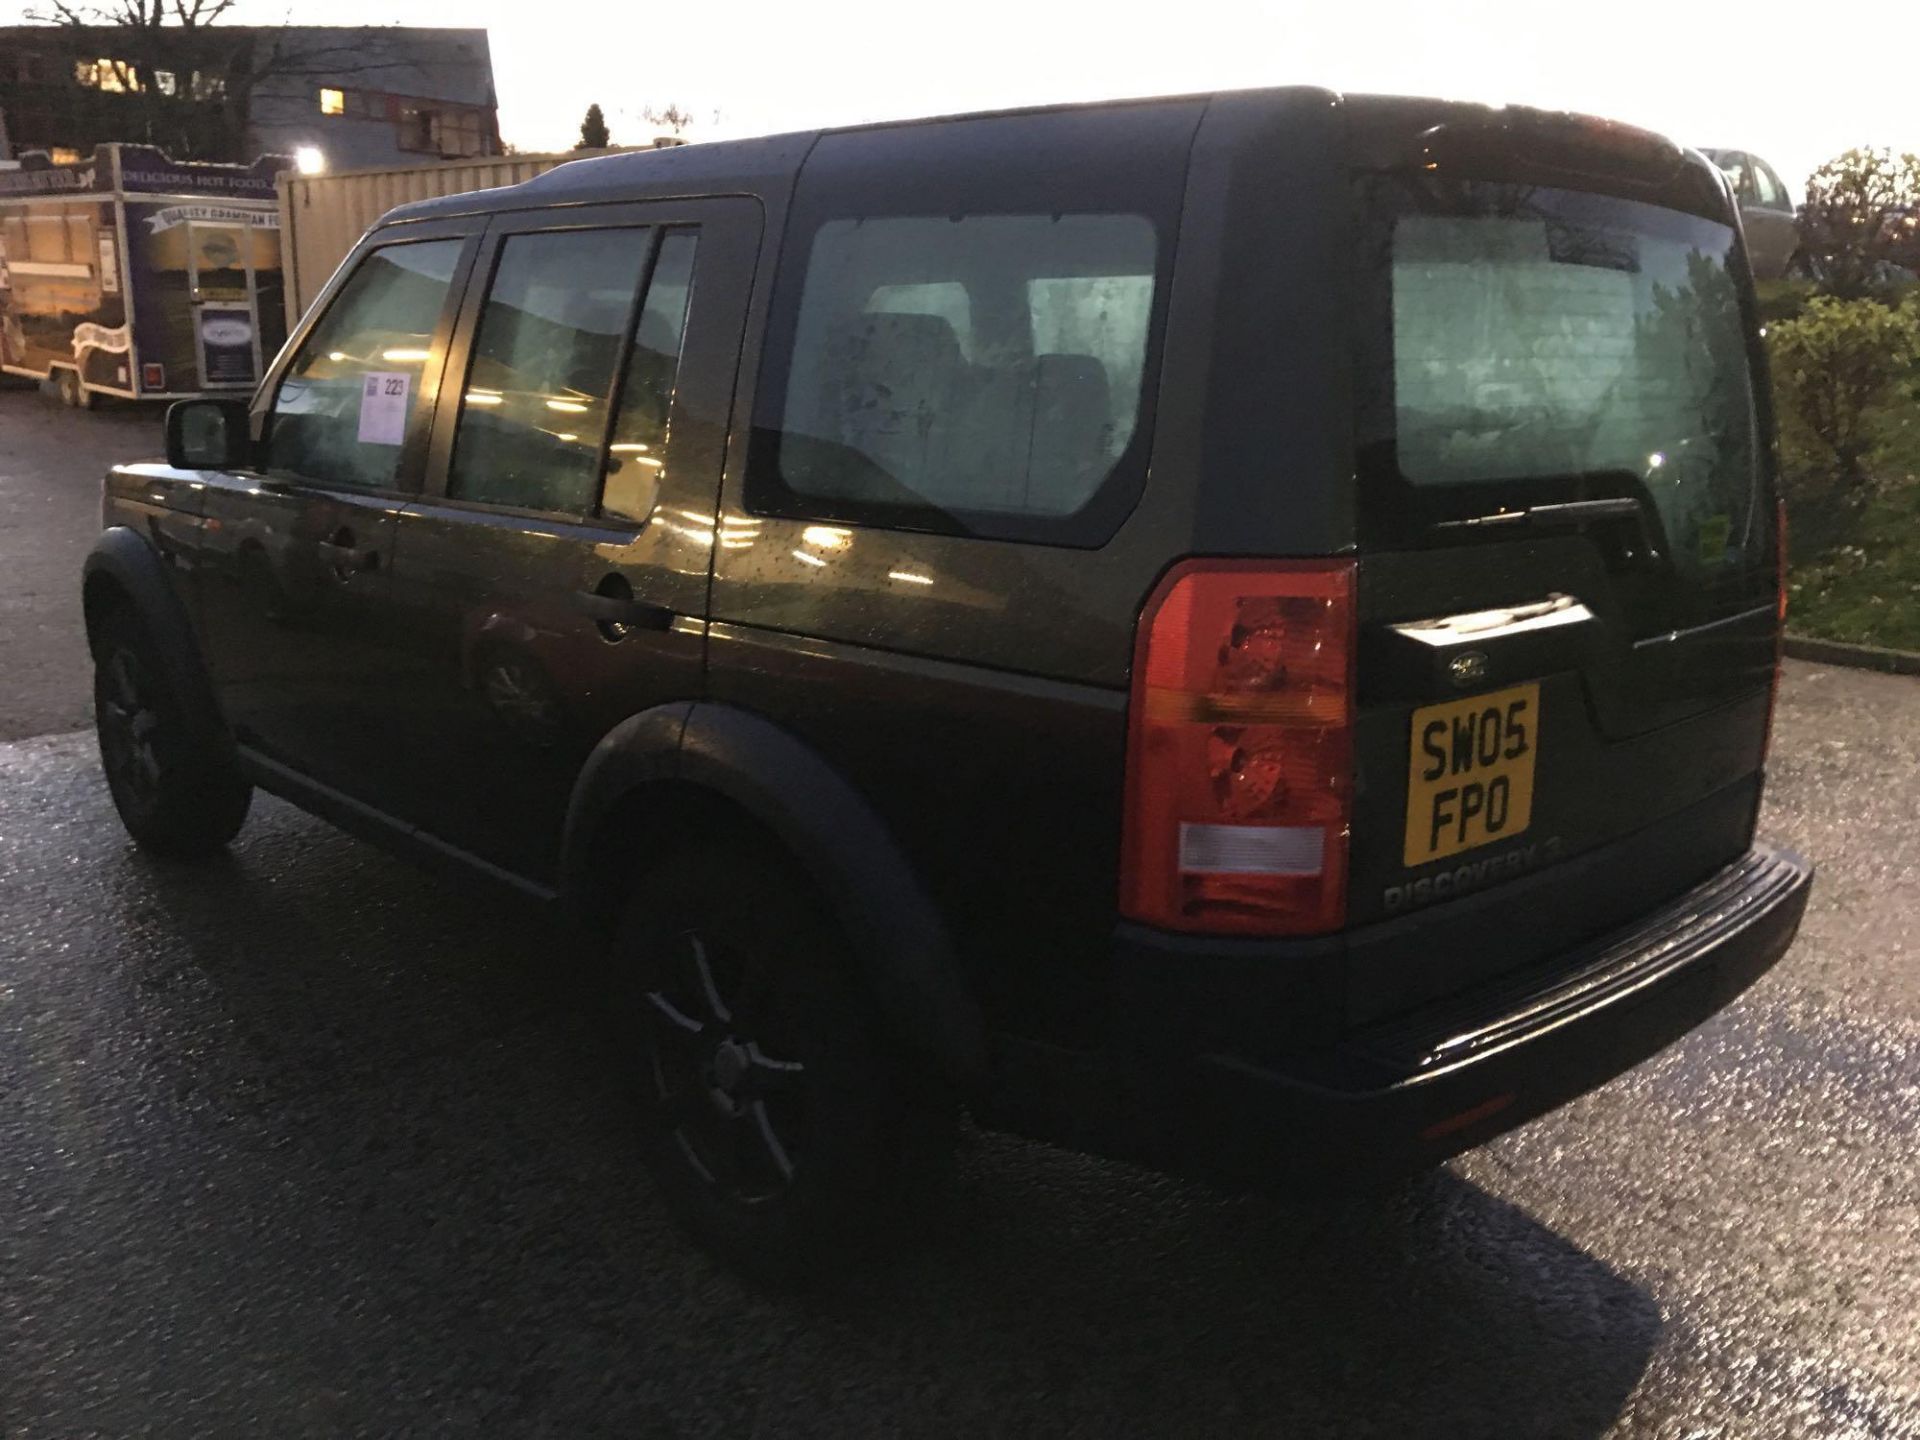 Land Rover Discovery 3 Tdv6 - 2720cc Estate - Image 2 of 2